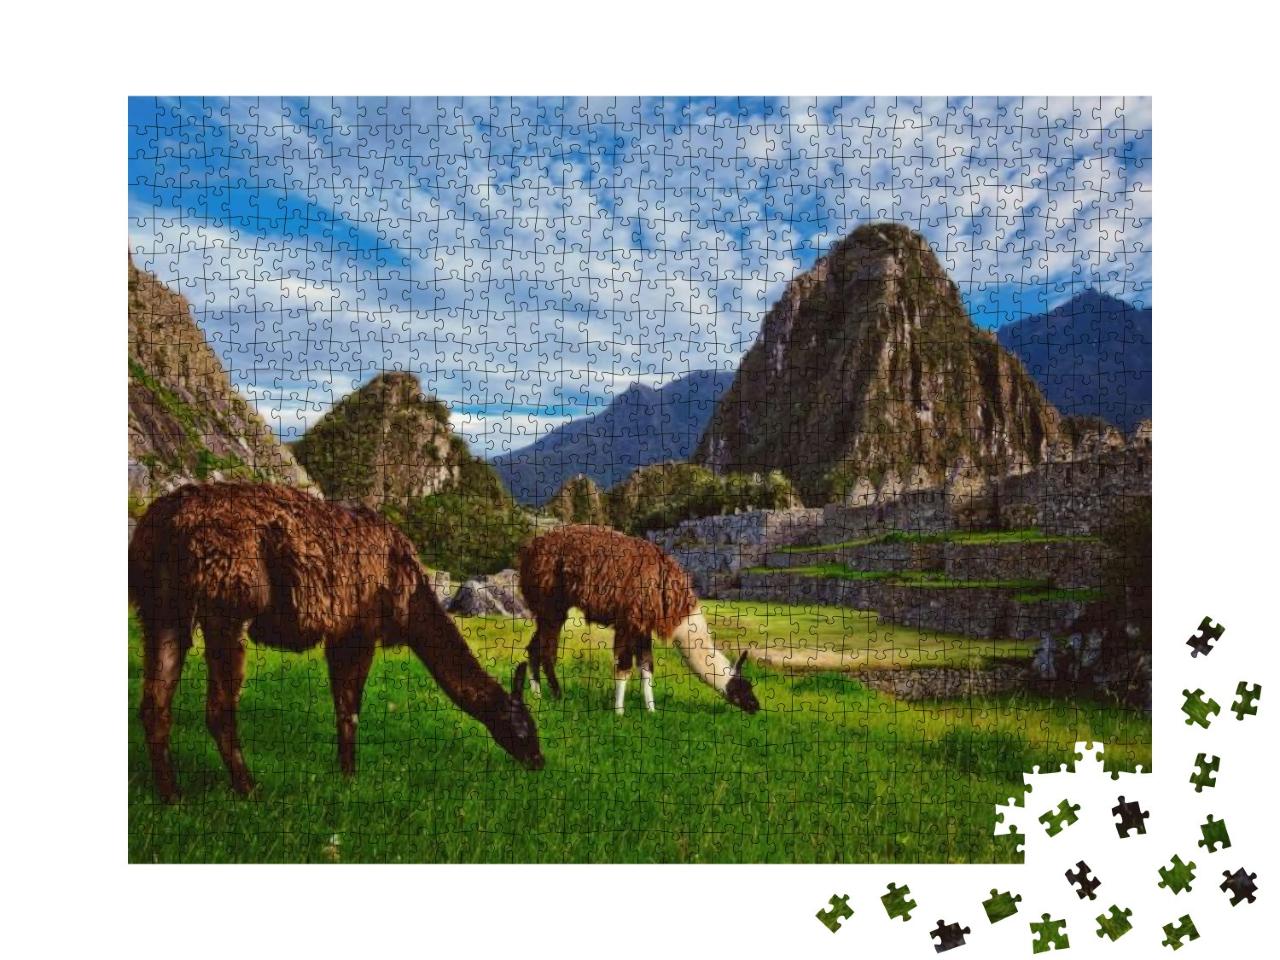 Two Llamas Eat Grass in the Inca Citadel of Machu Picchu... Jigsaw Puzzle with 1000 pieces